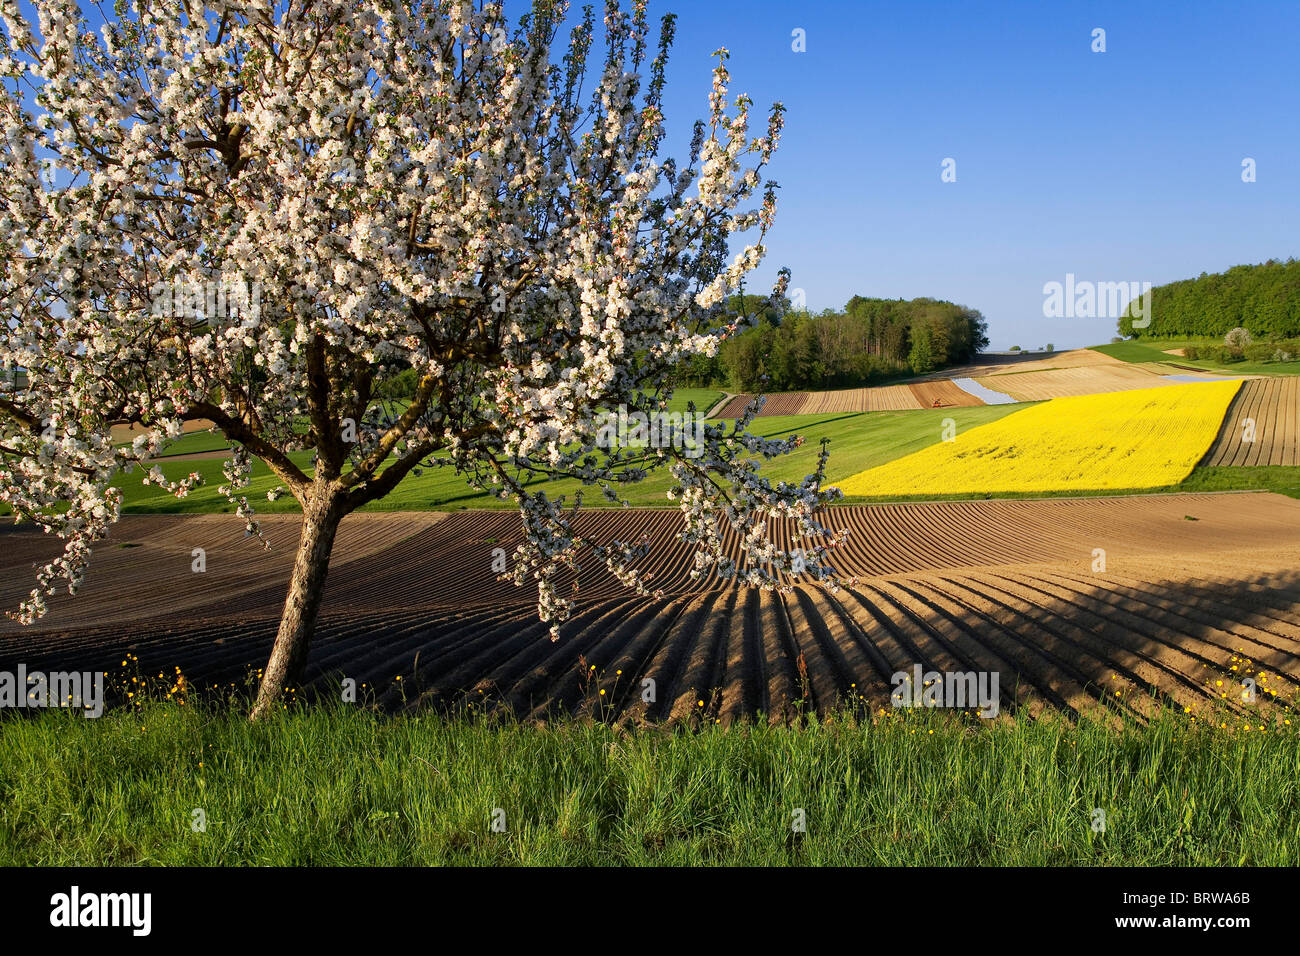 Blossoming apple tree, fields of Rapeseed, Potatoes and vegetables, Buechlen, Fribourg, Switzerland, Europe Stock Photo